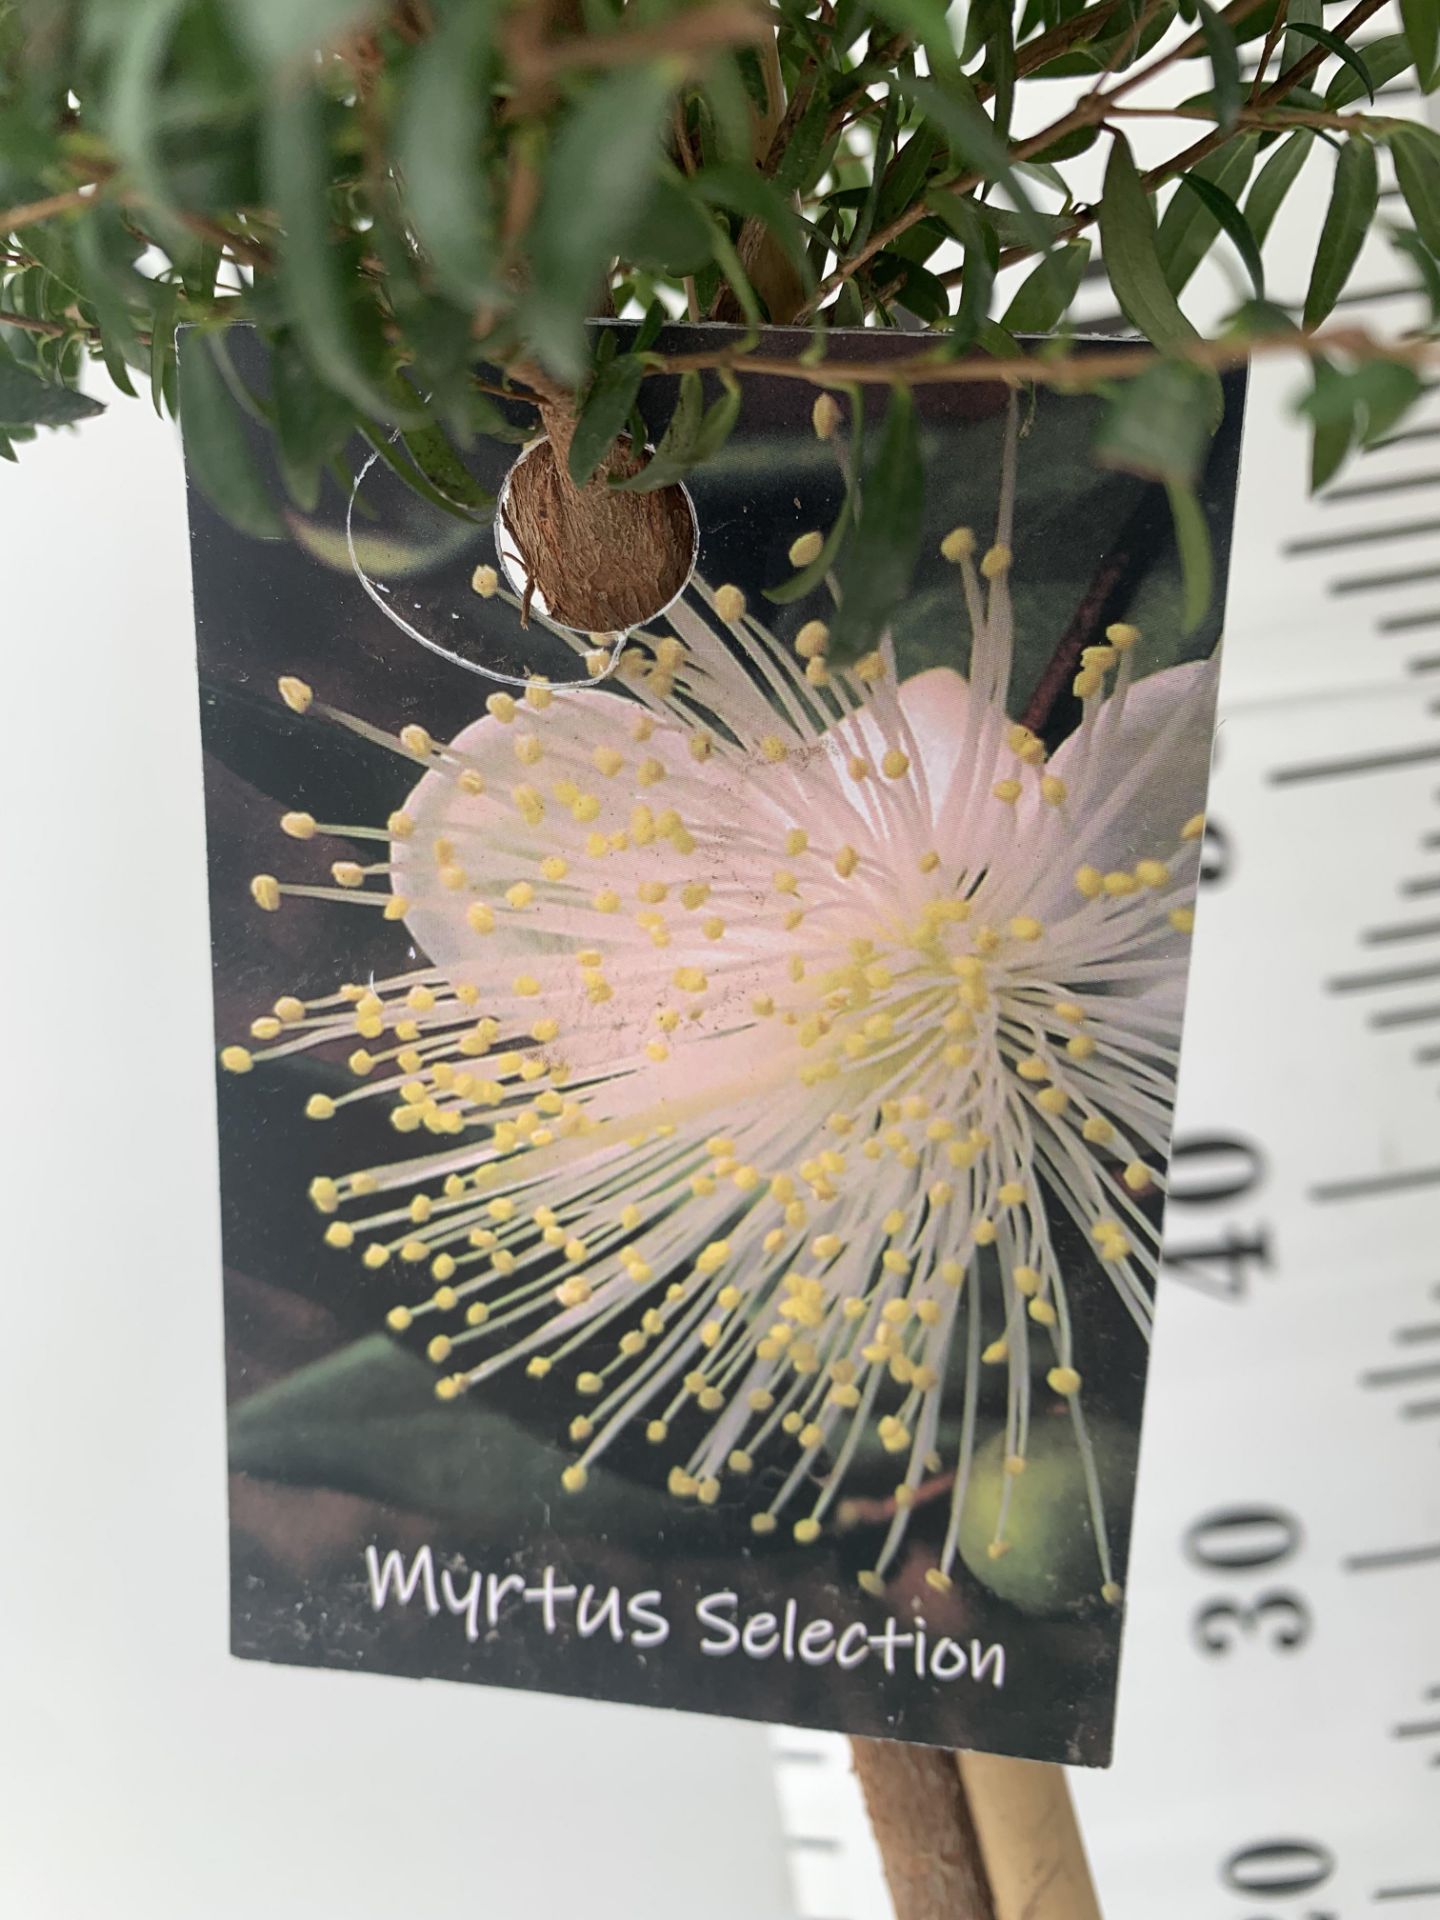 TWO MYRTUS SELECTION STANDARD TREES OF DIFFERING HEIGHTS ONE APPROX 85CM IN HEIGHT AND ONE 70CM IN 2 - Image 7 of 10